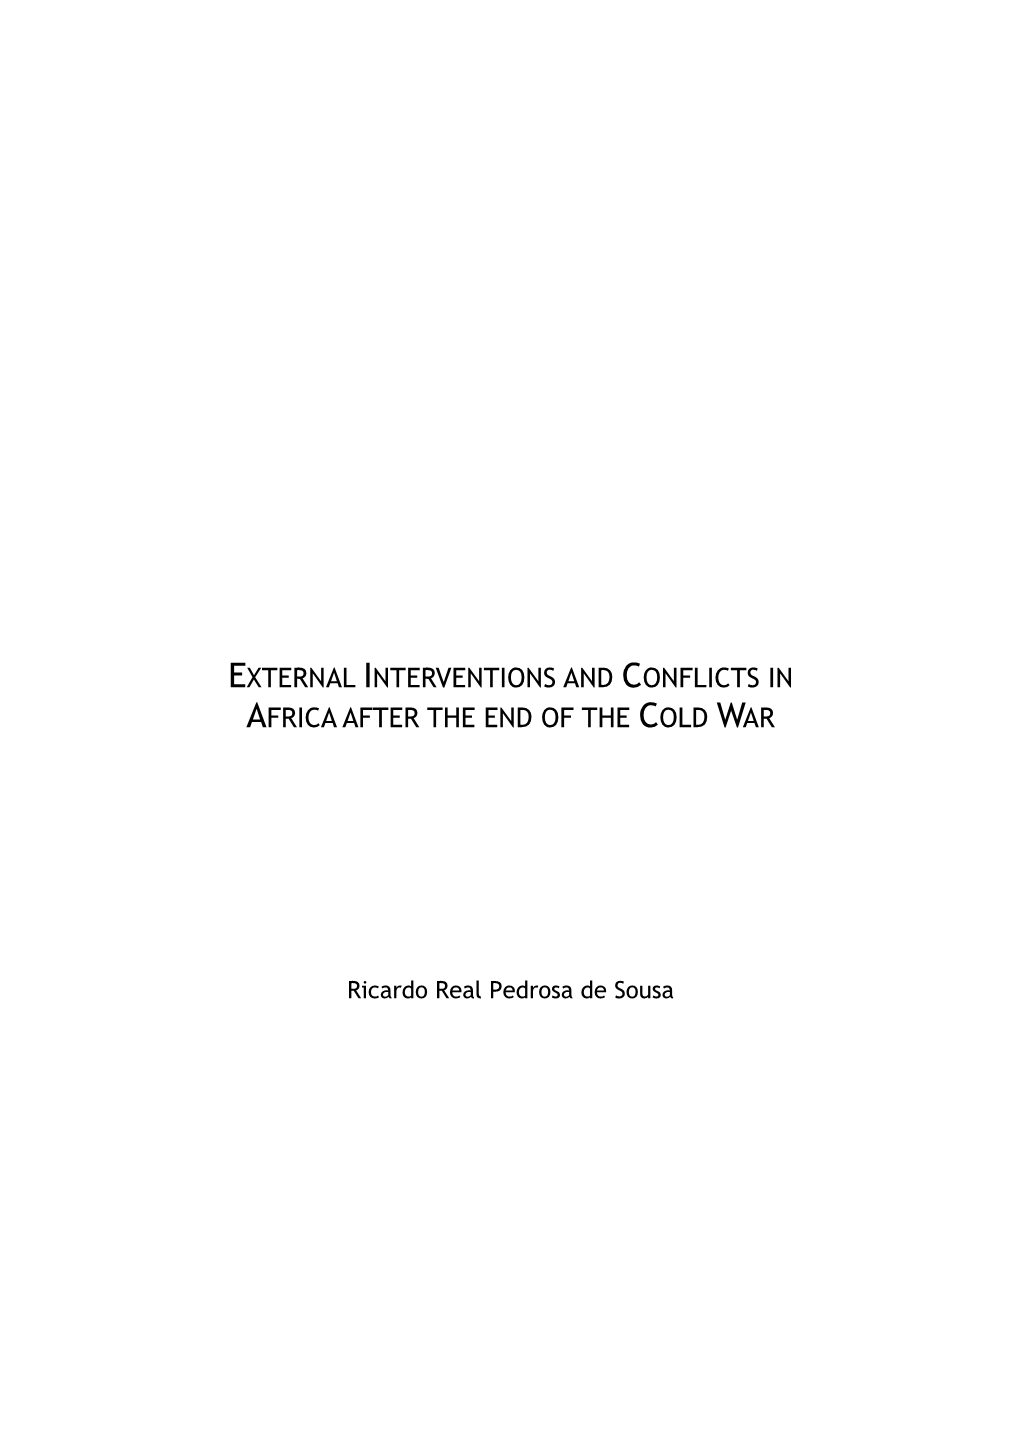 External Interventions and Conflicts in Africa After the End of the Cold War